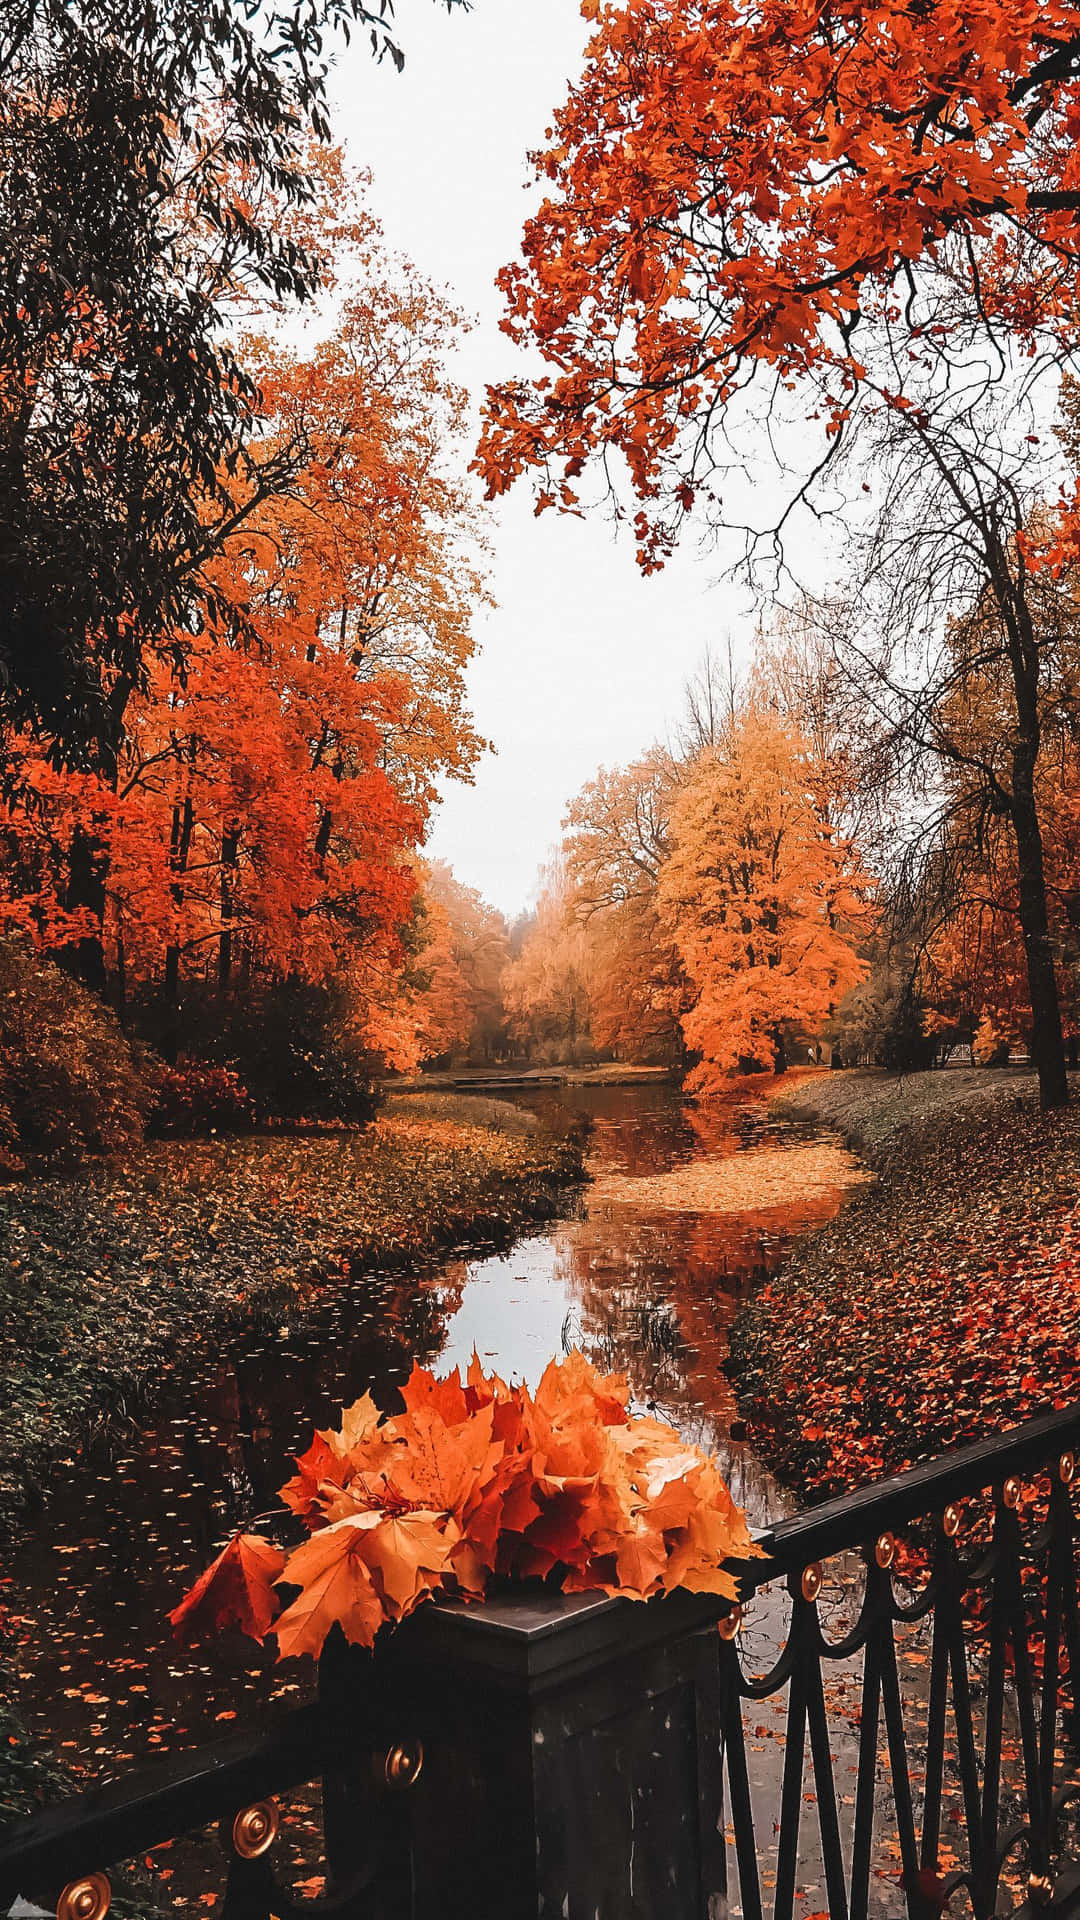 Adding a touch of autumn to your phone Wallpaper